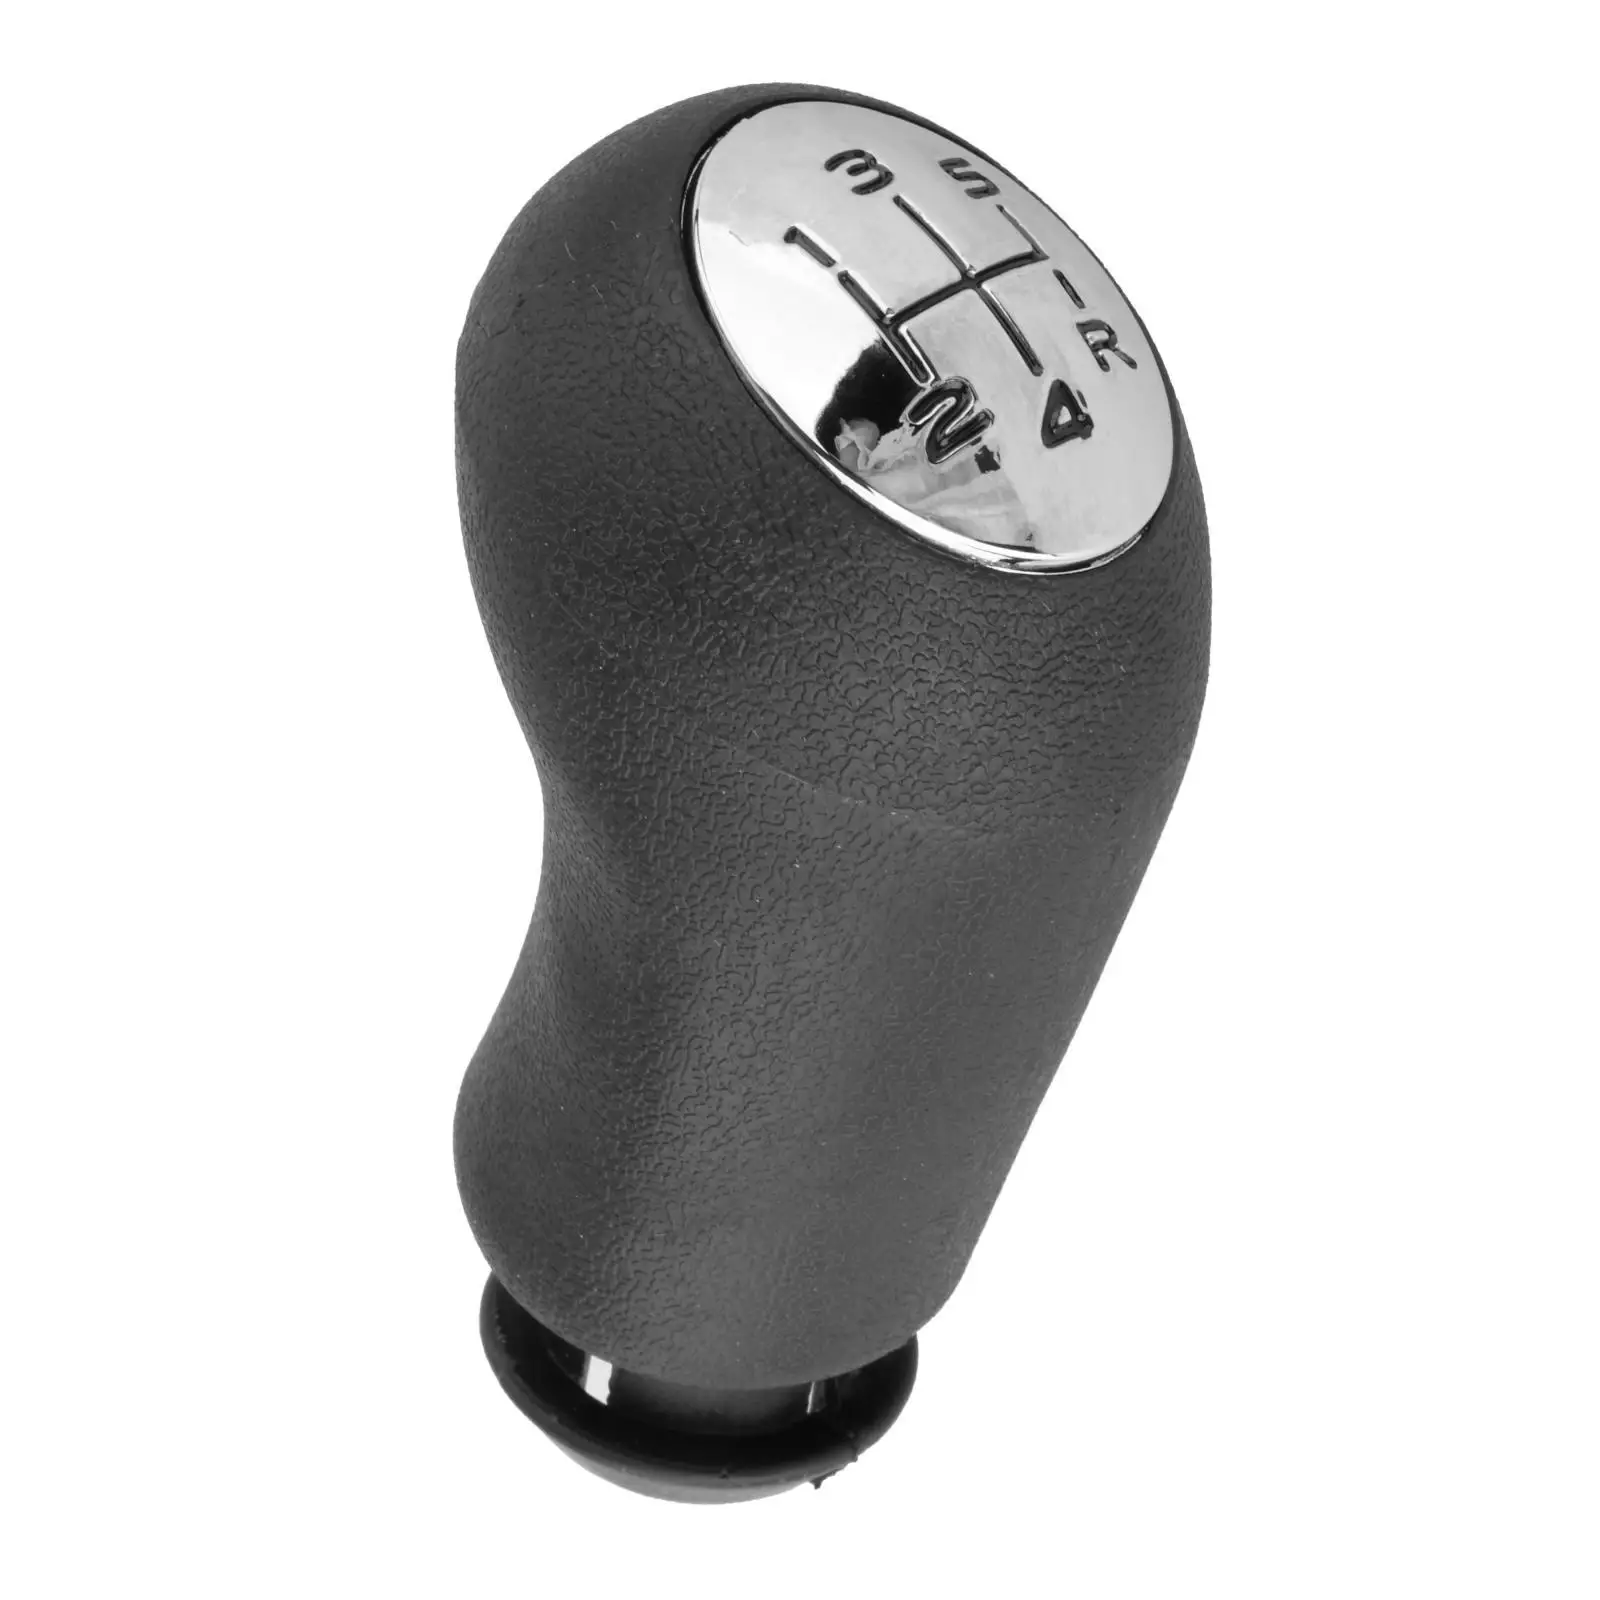 Car Manual Gear shifter Knob Replaces High Performance Easy to Install Accessories   Scenic   